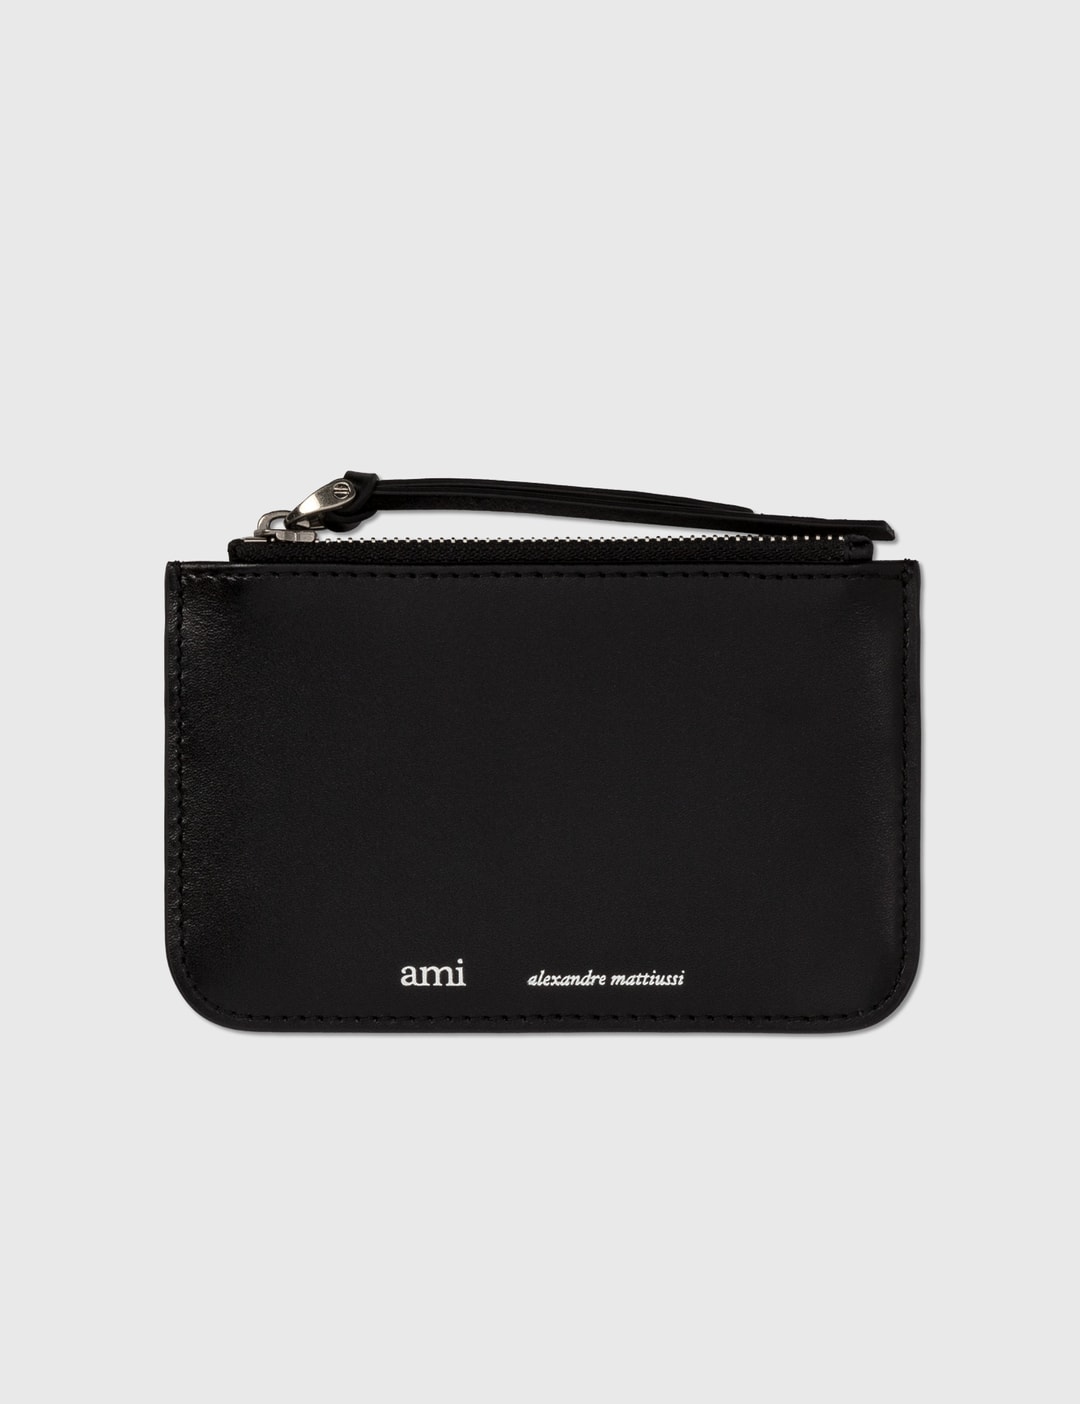 Zipped Wallet Placeholder Image